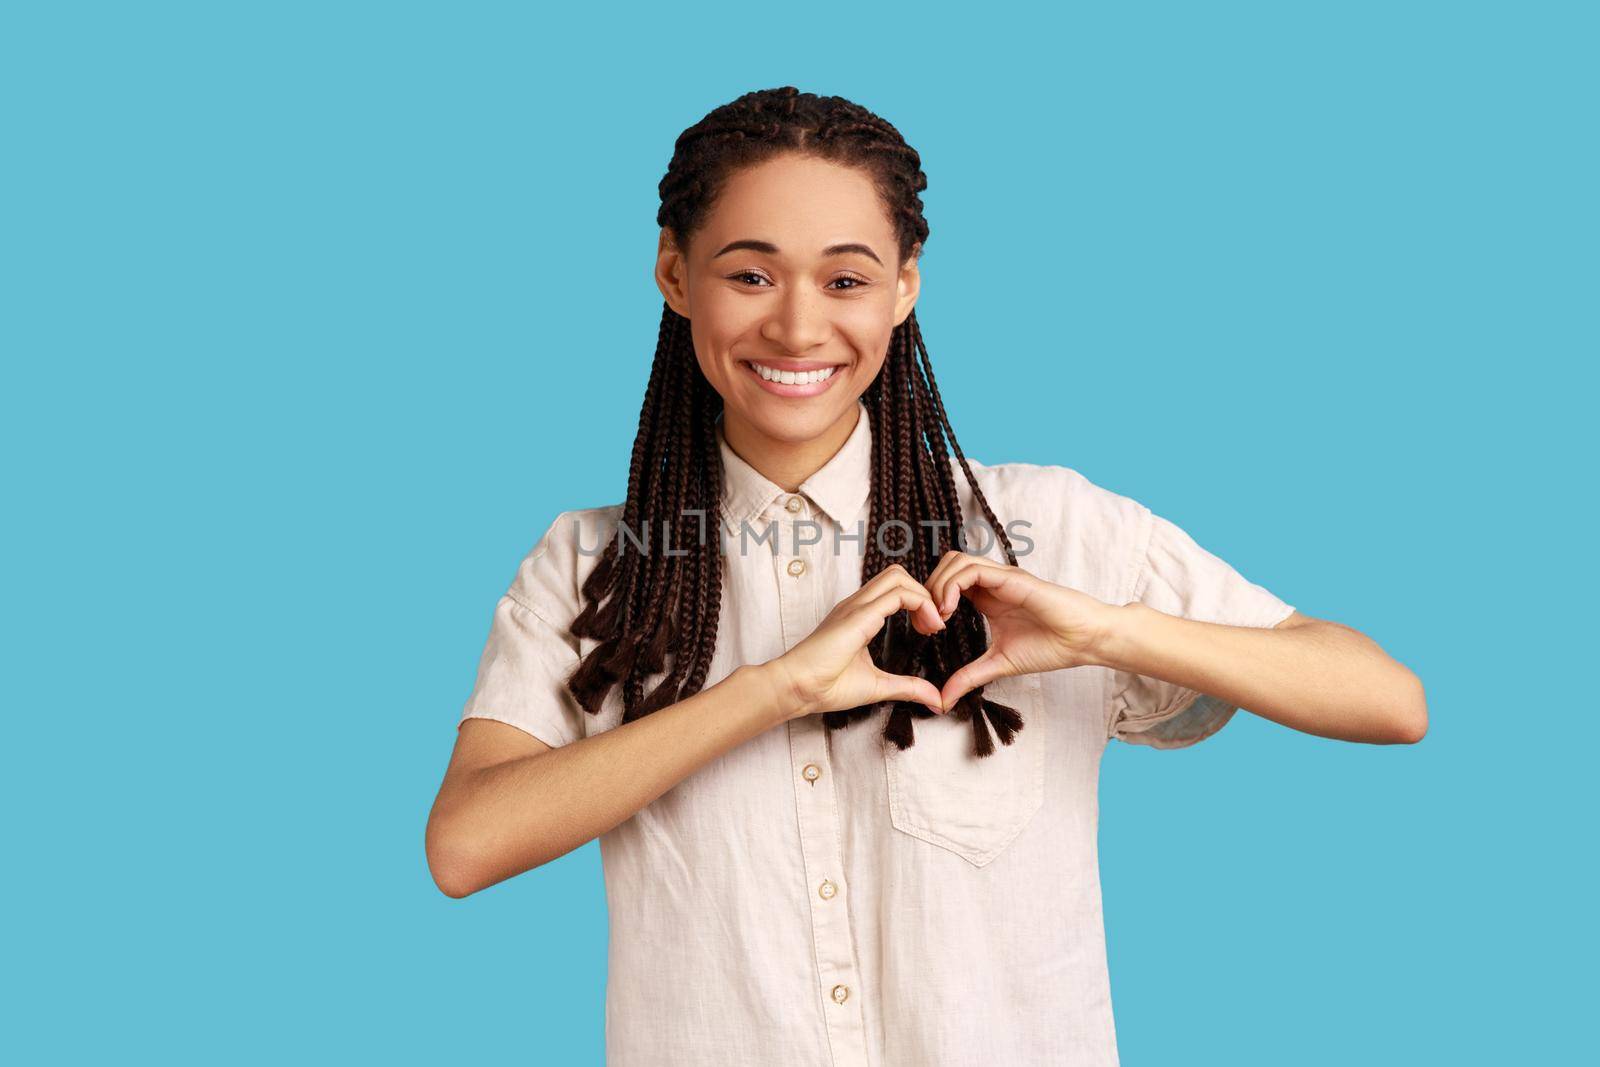 Beautiful woman with black dreadlocks gesture heart over chest, expresses love, says be my valenetine, smiles positively, wearing white shirt. Indoor studio shot isolated on blue background.